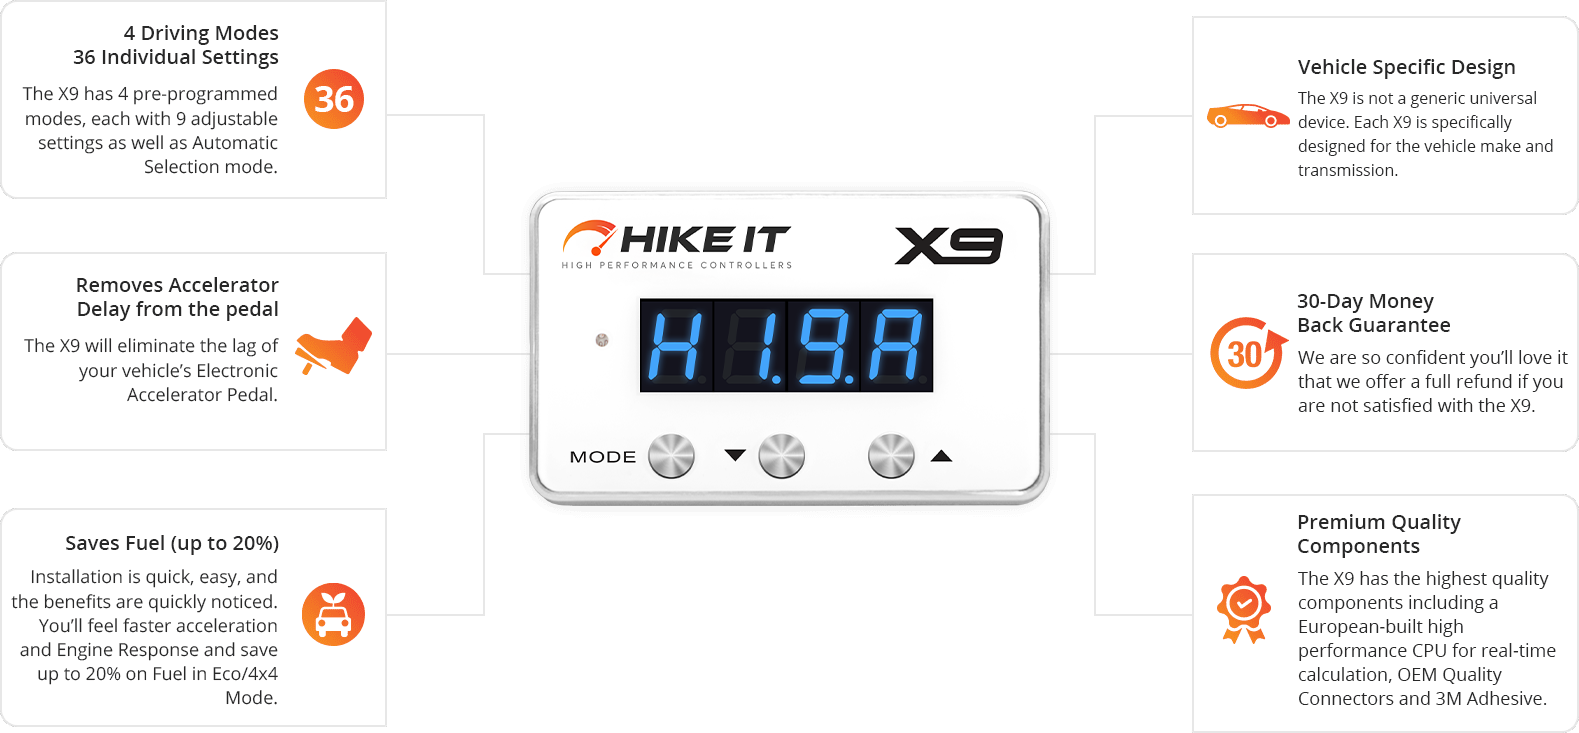 HIKEIT THROTTLE CONTROLLER FOR VW - REEL 'N' DEAL TACKLE